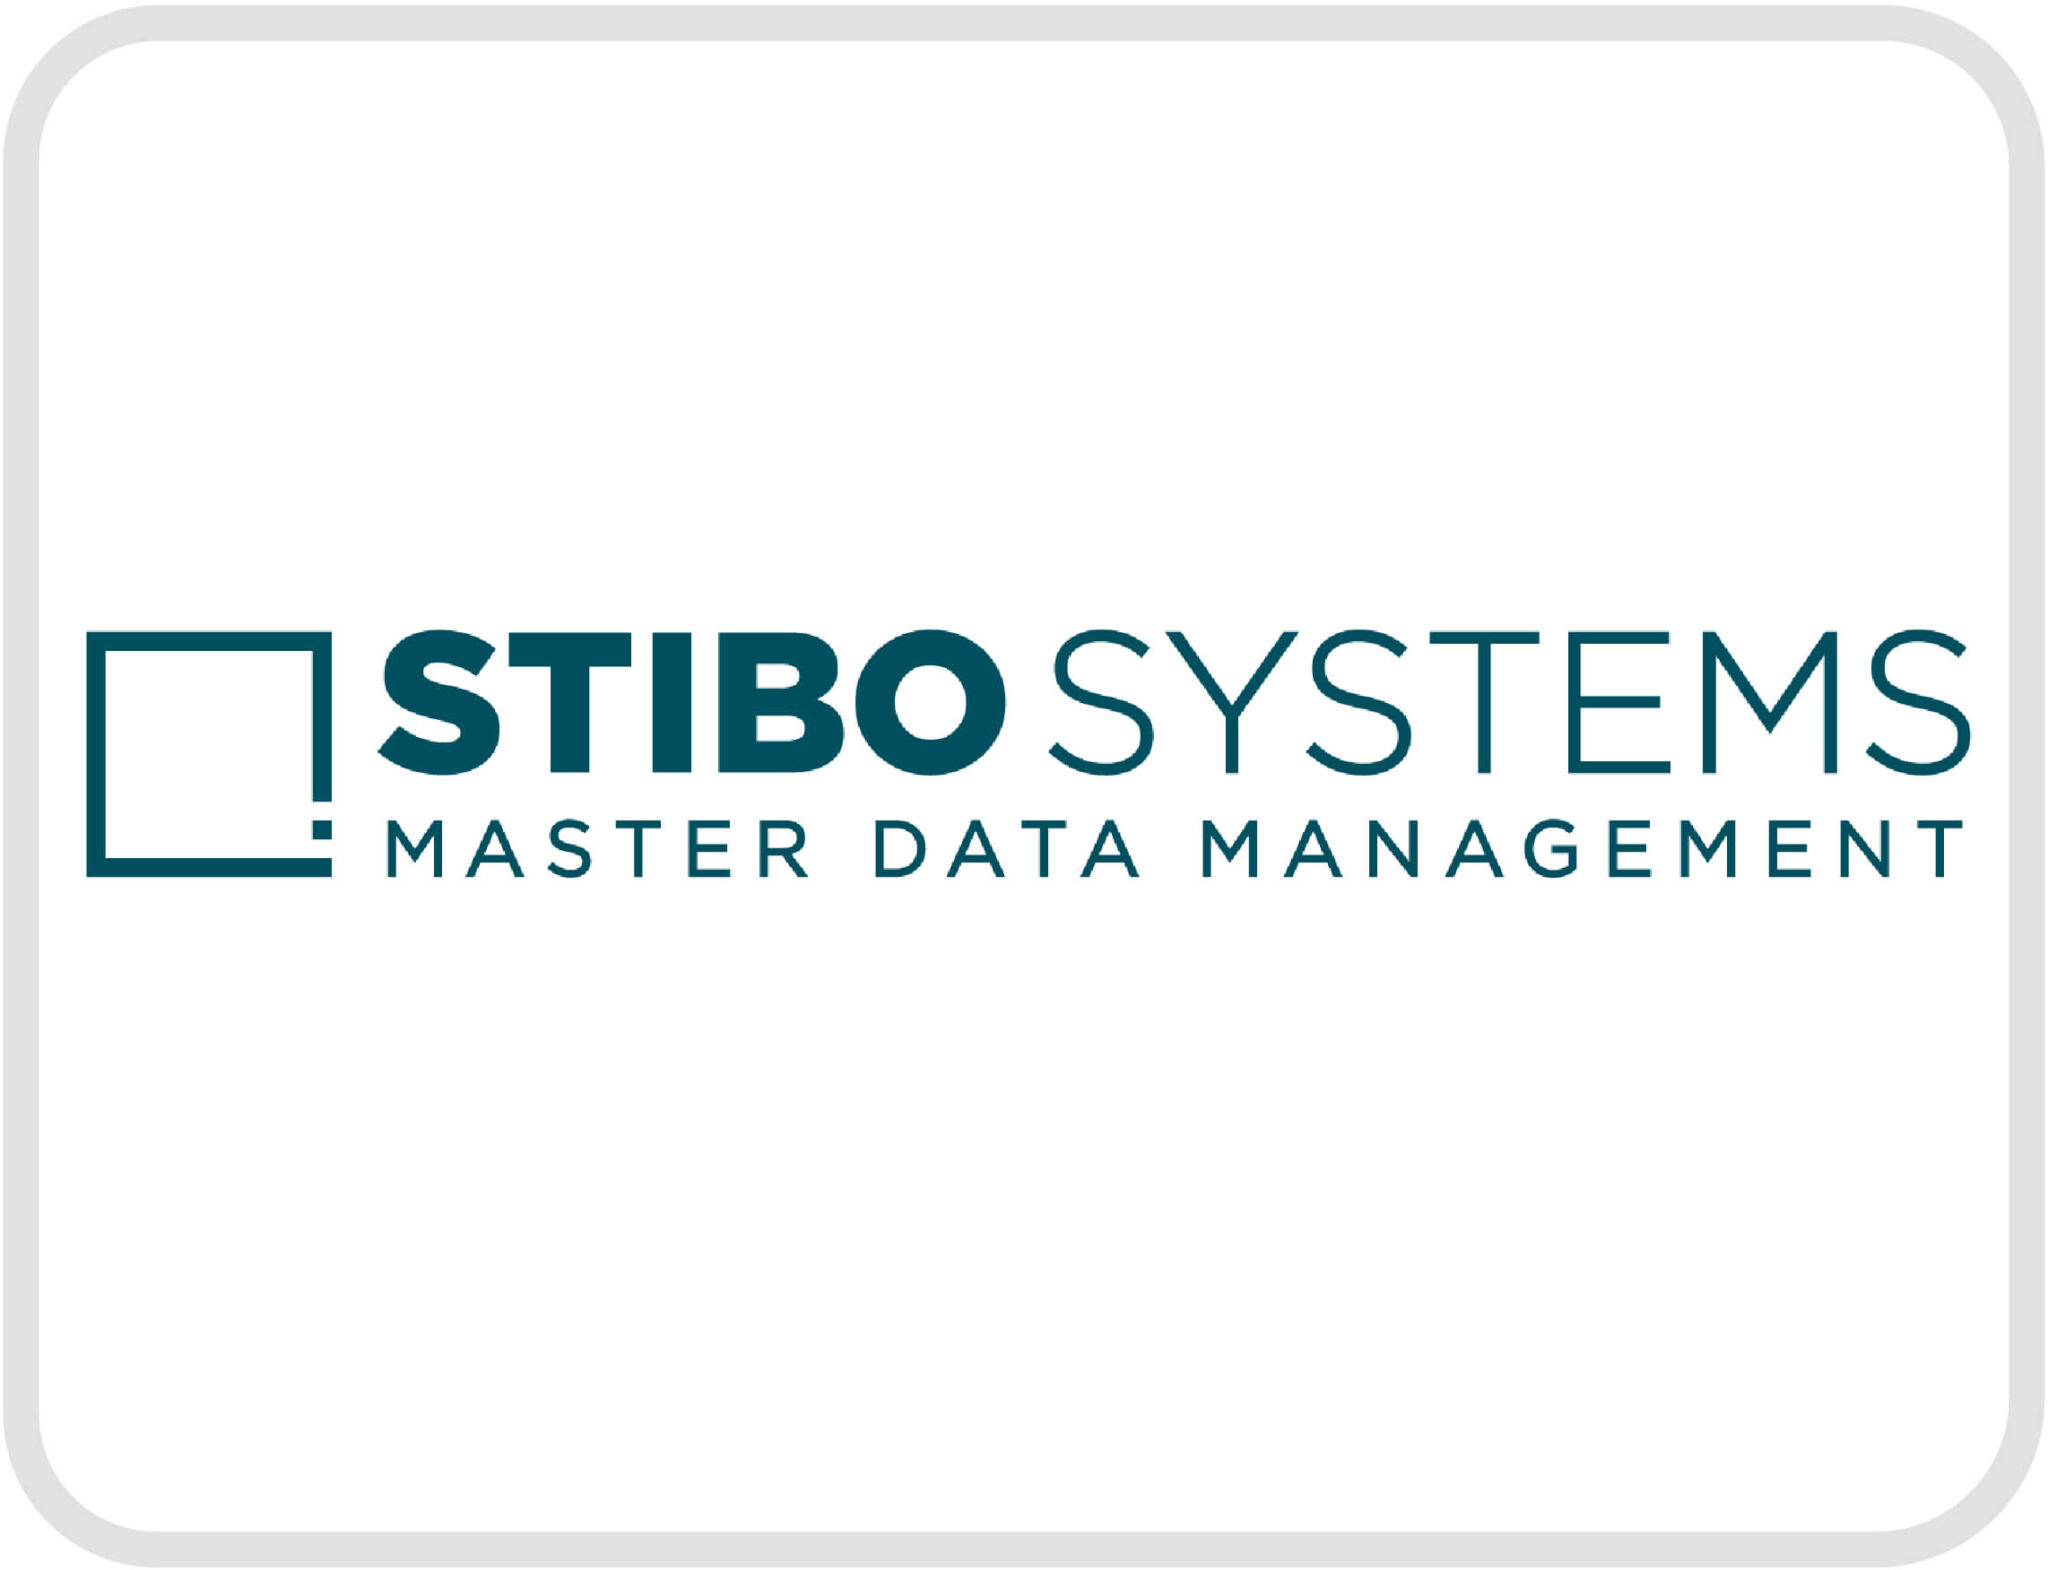 This is the STIBO Systems logo